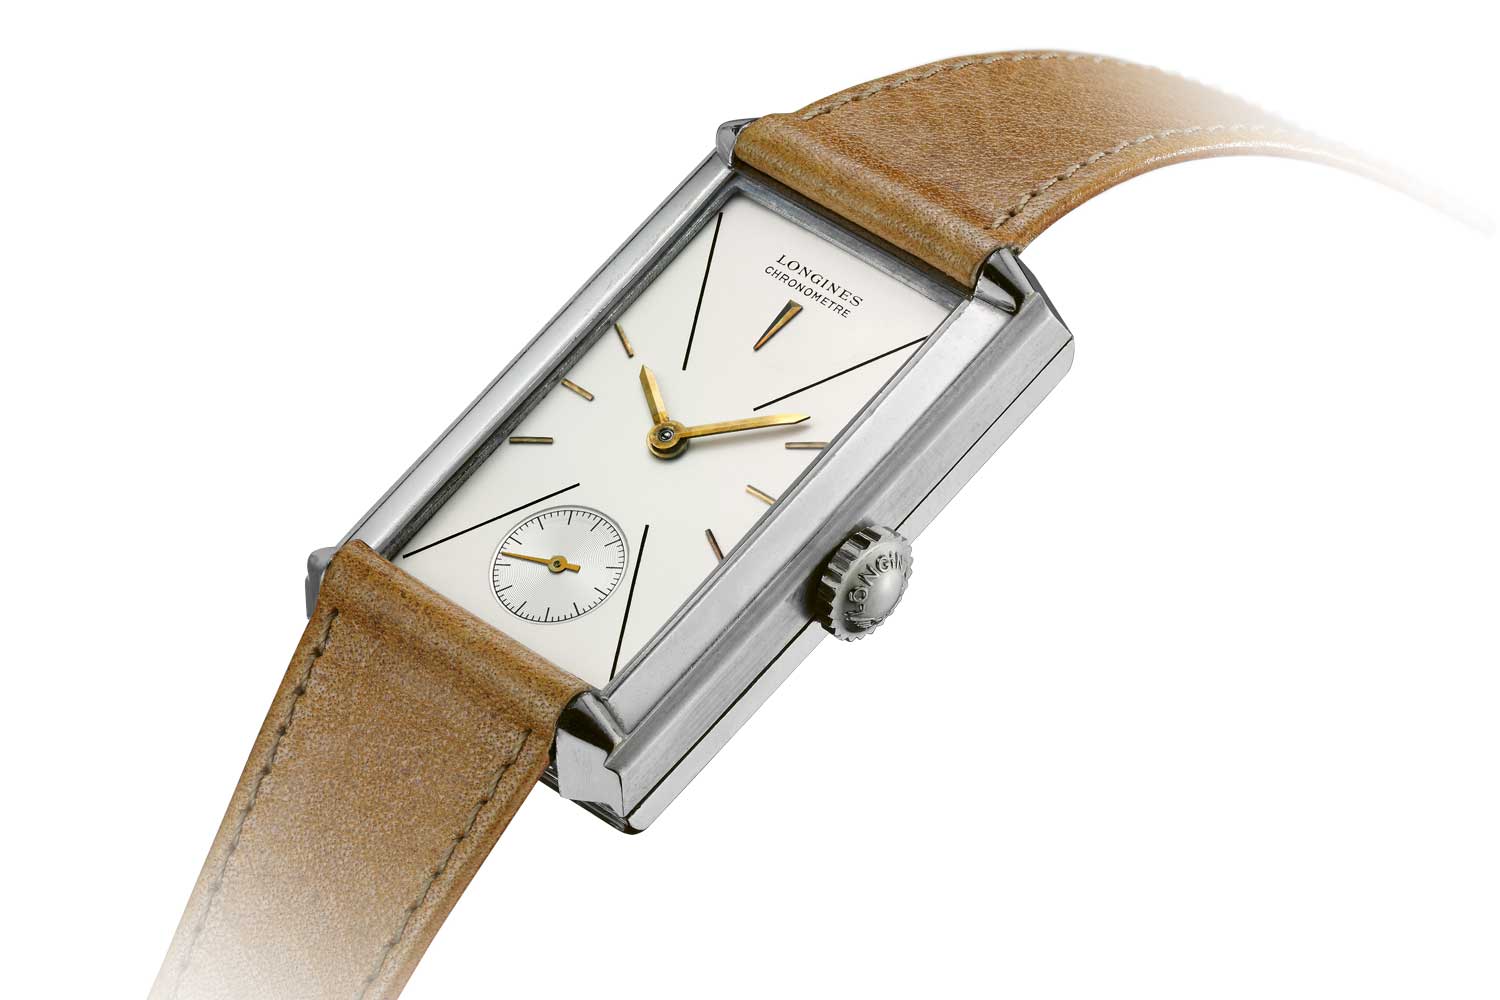 1959: First high-frequency wristwatch Observatory Chronometer (Caliber 360)